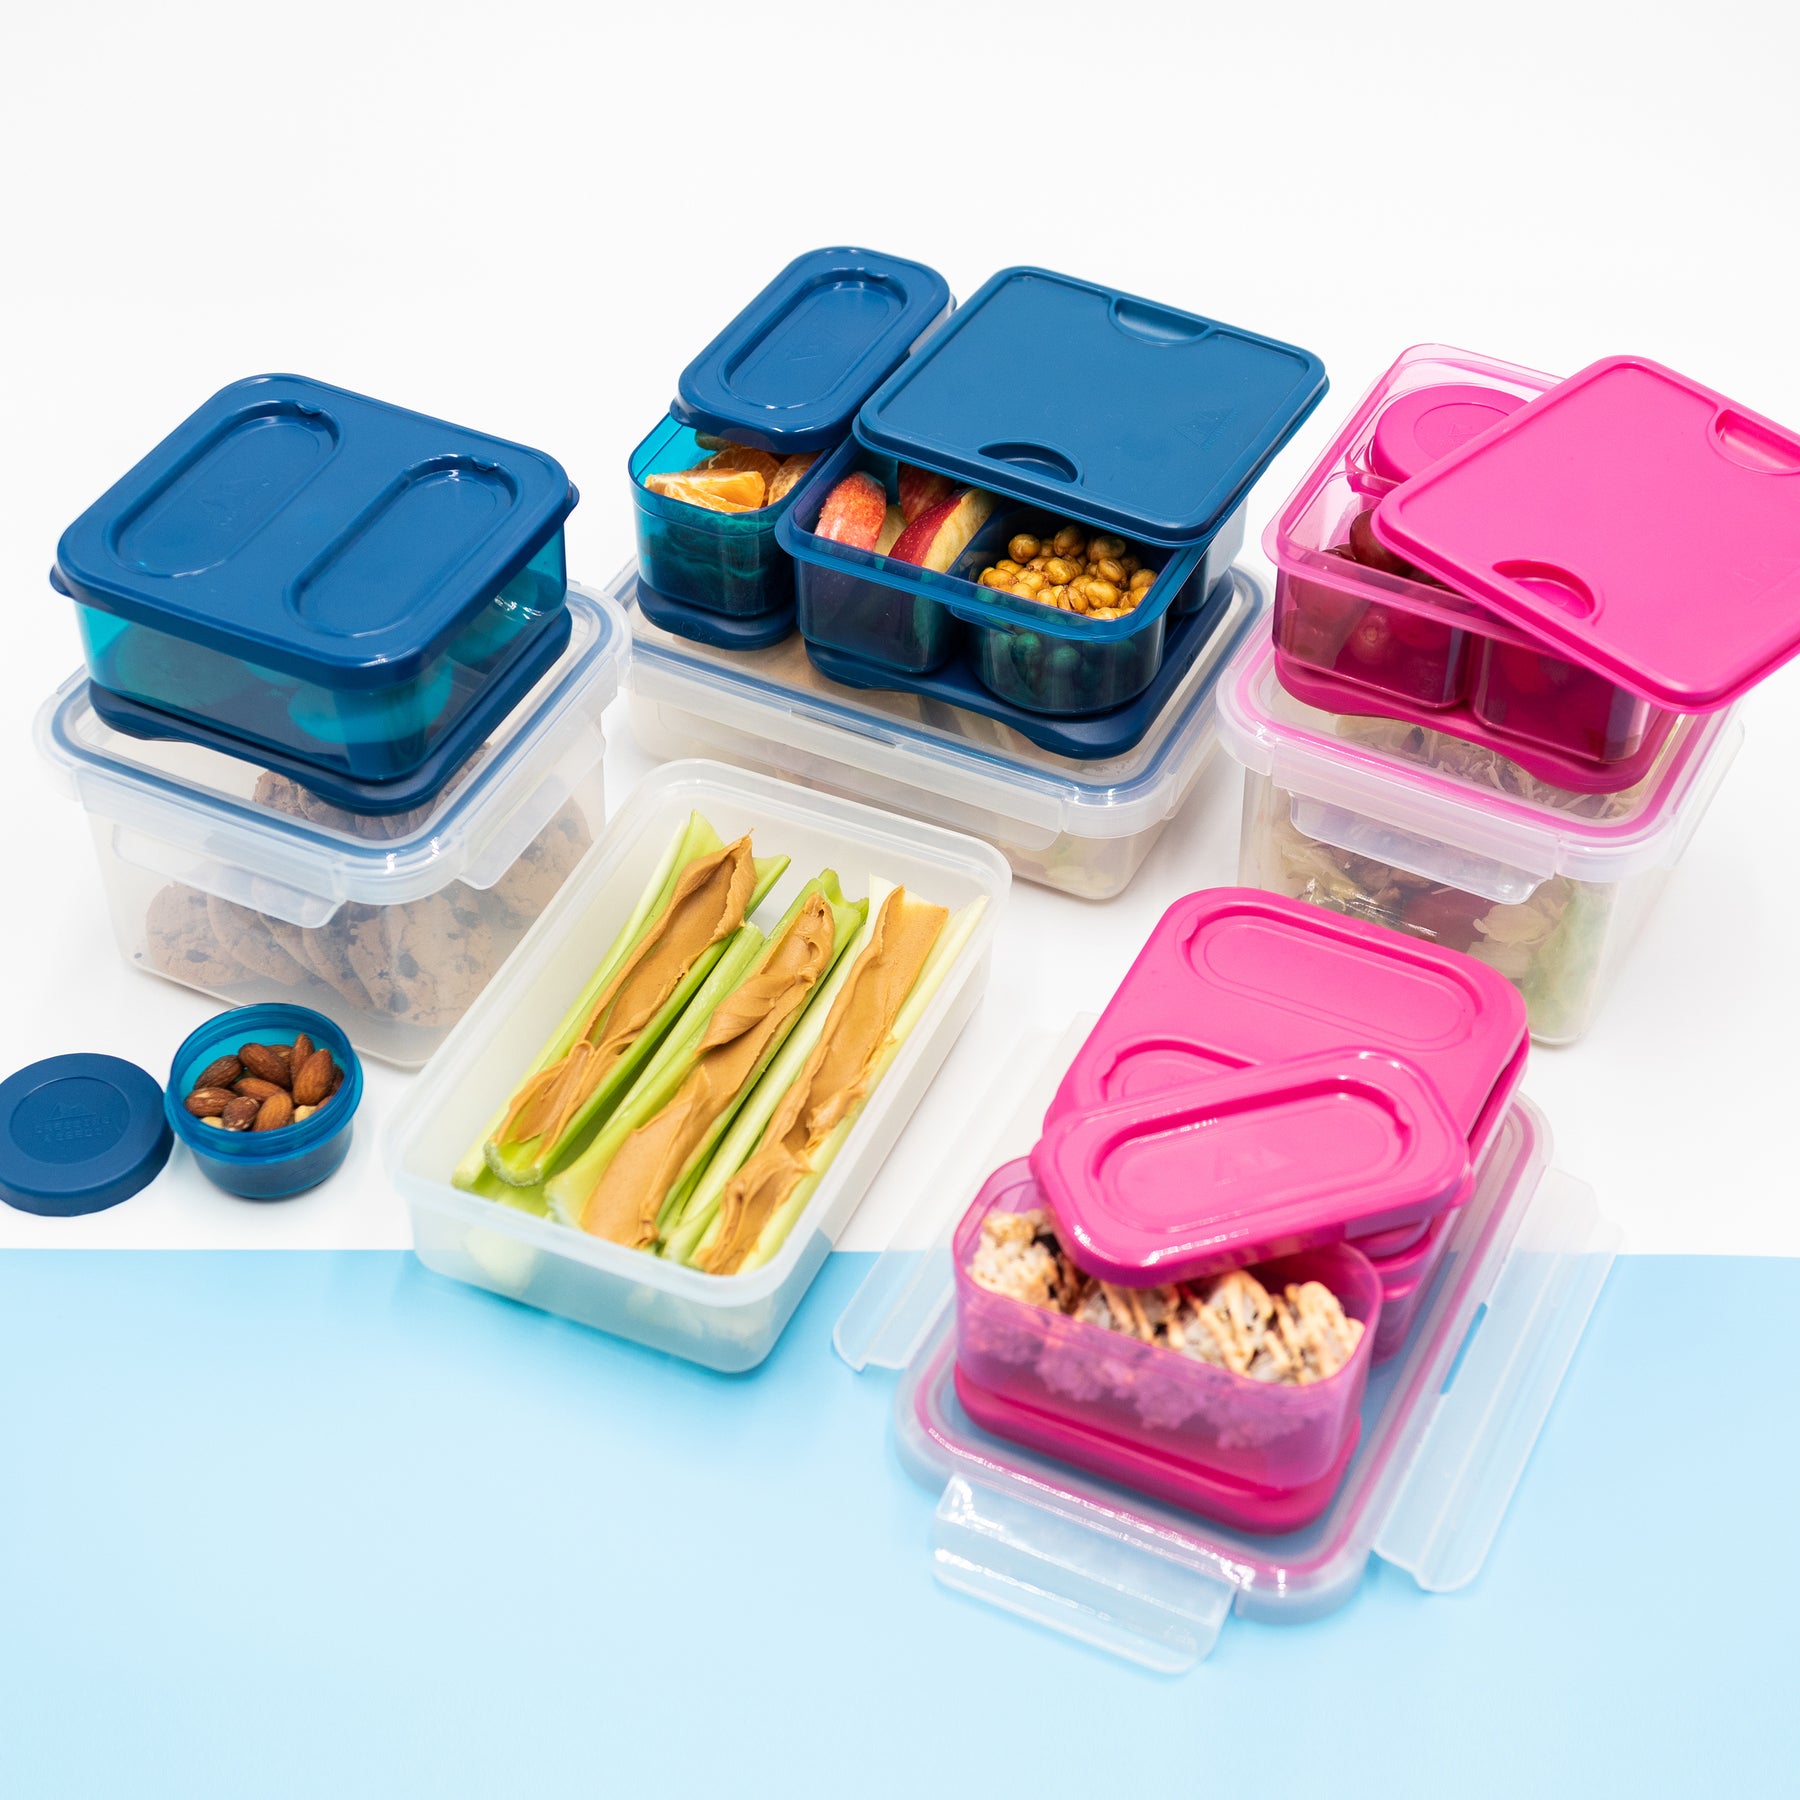 8 Piece All-in-One Entrée Set Pink by Arctic Zone